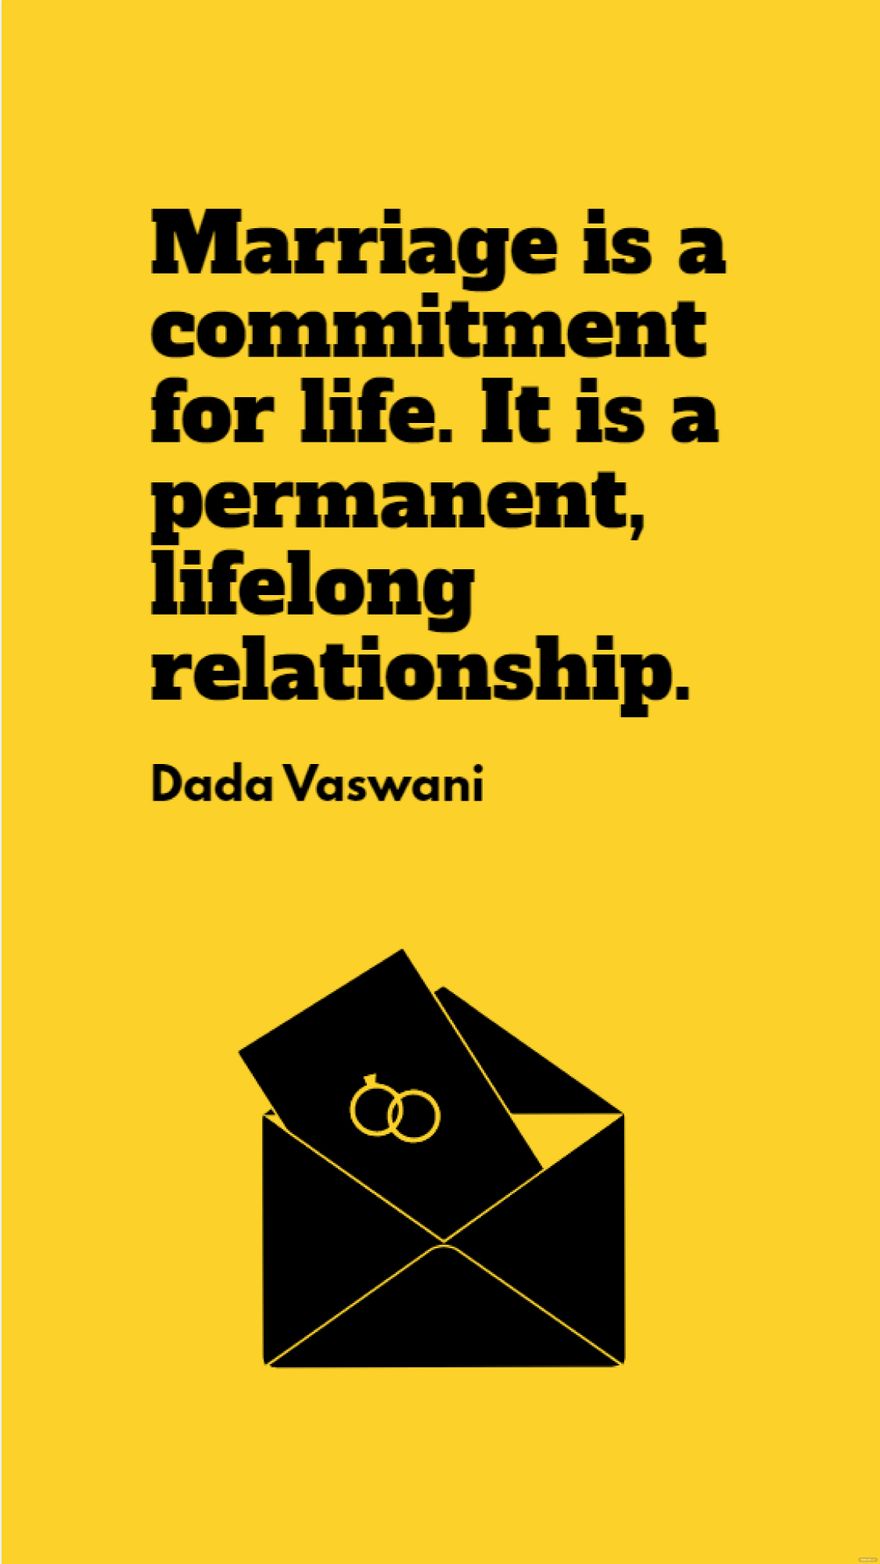 Dada Vaswani  Marriage is a commitment for life It is a permanent lifelong relationship